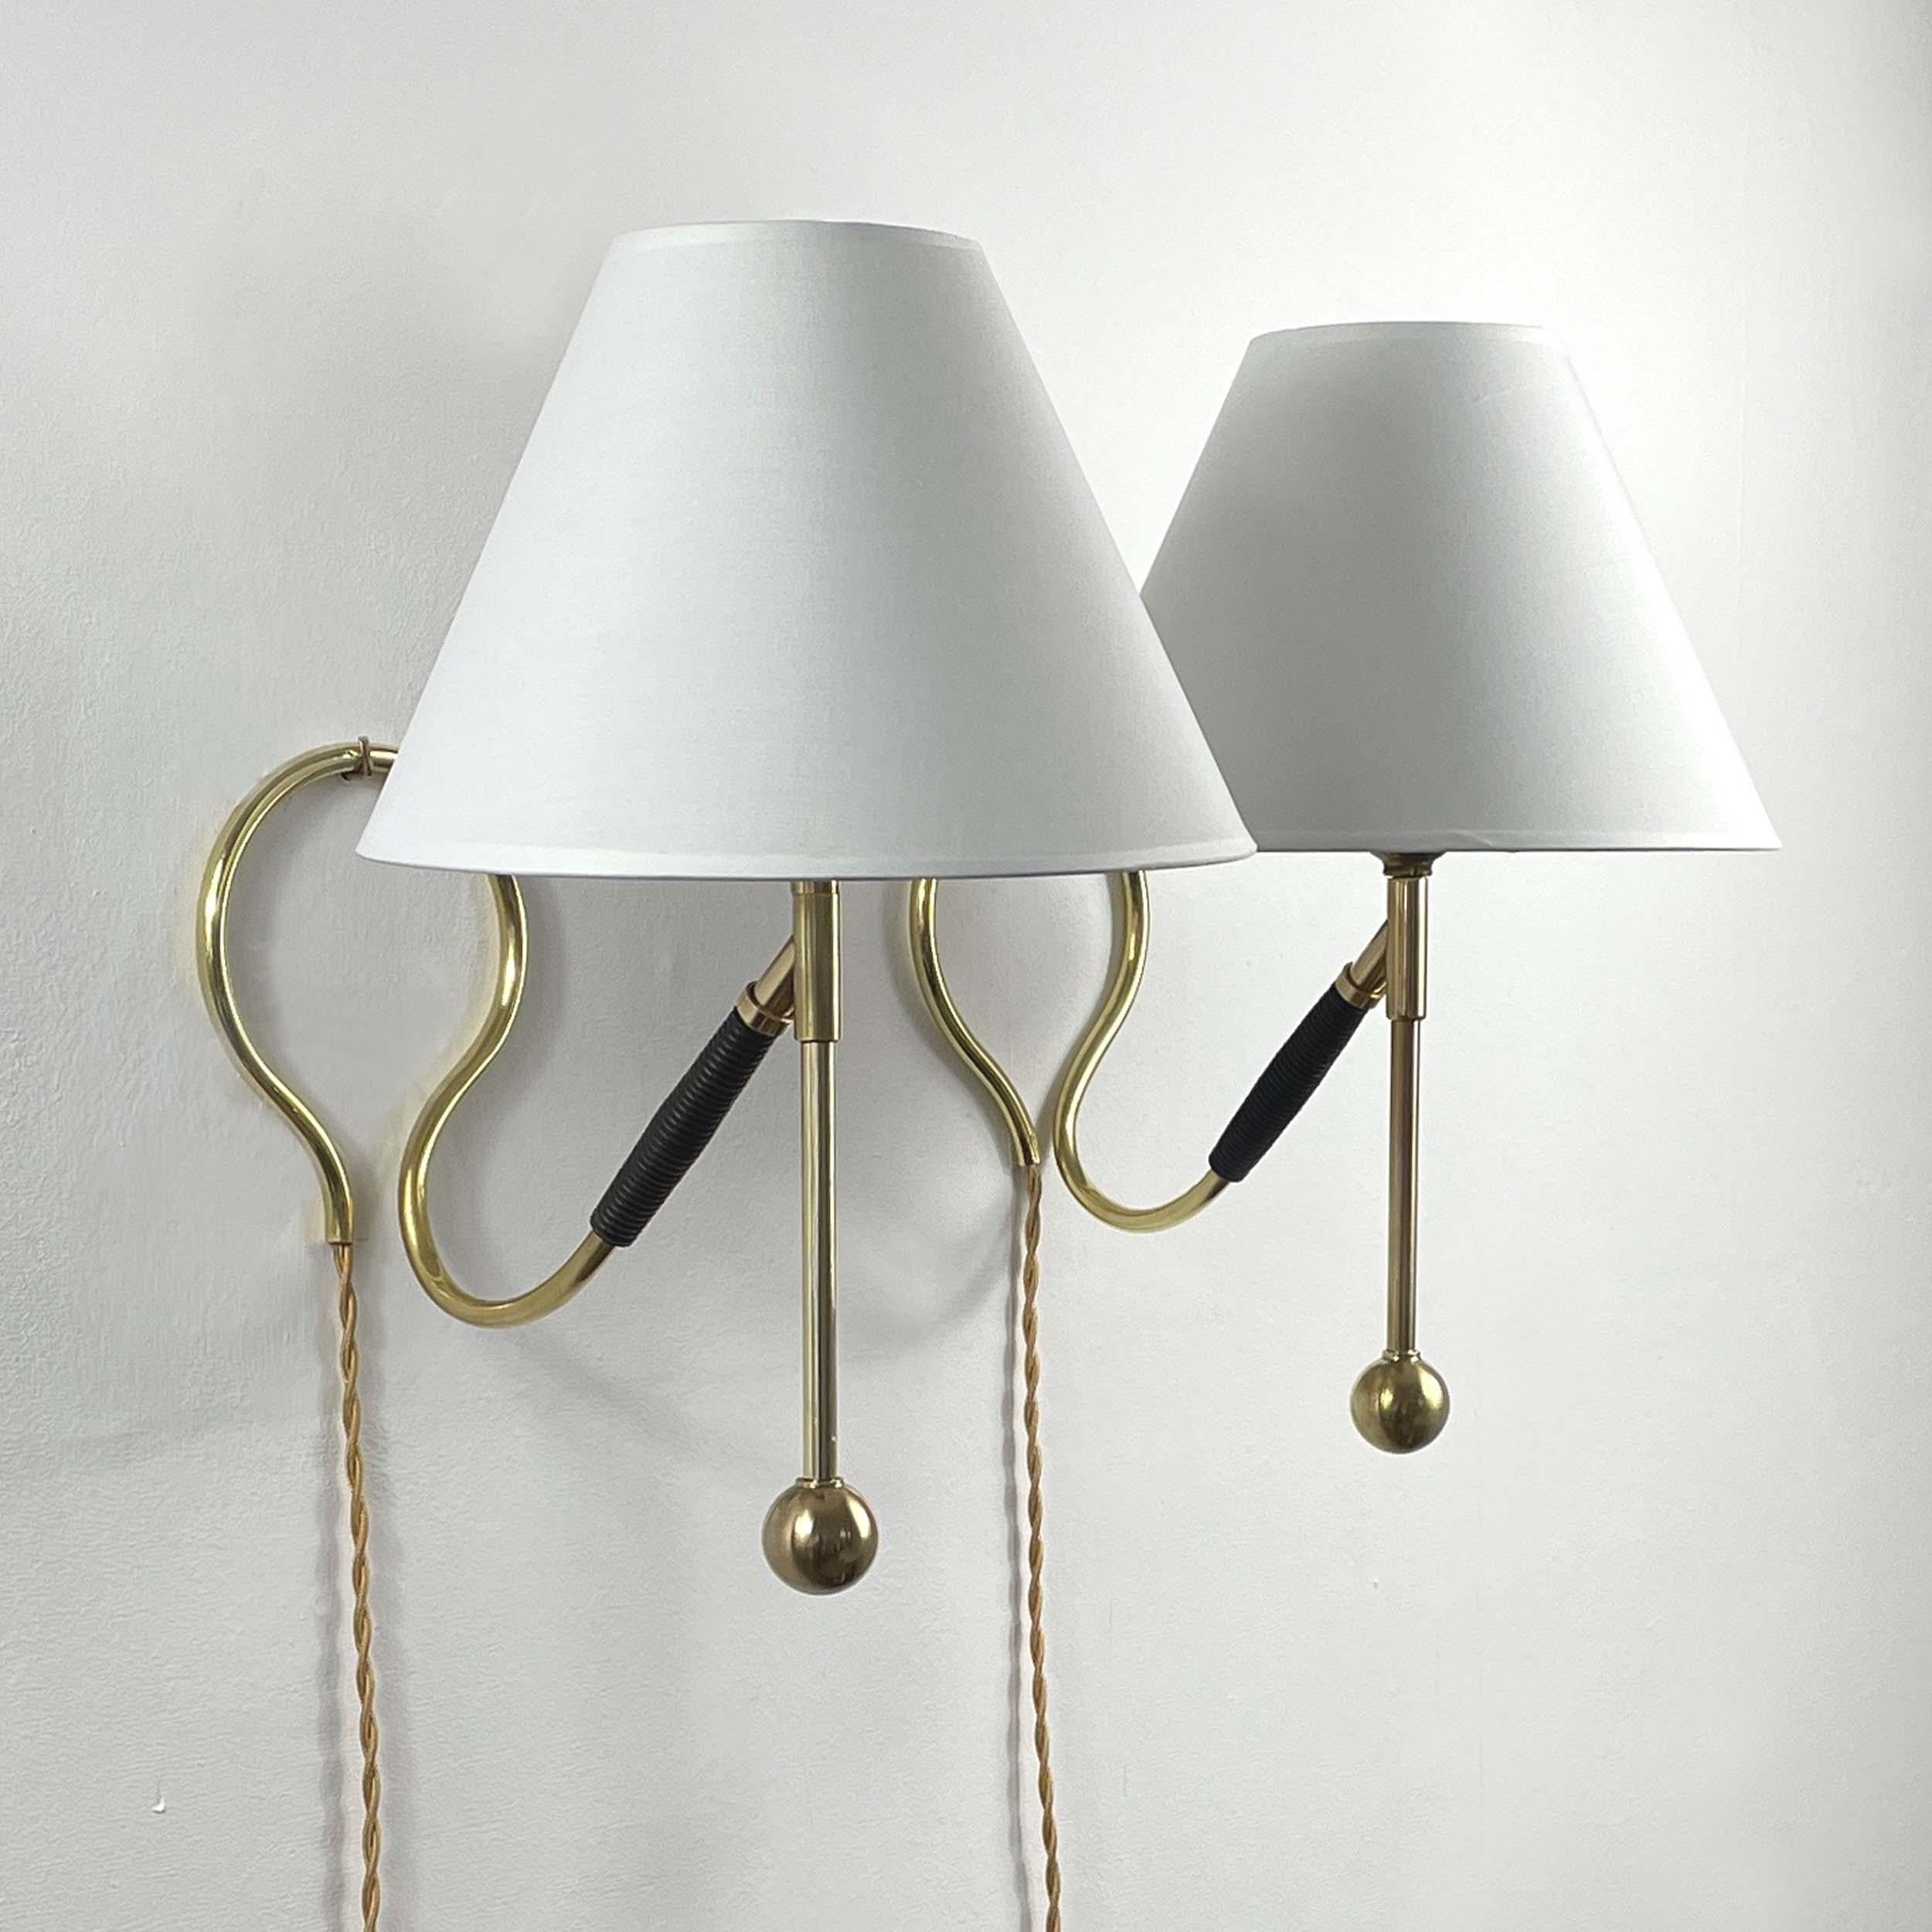 Adjustable Brass and Bakelite Wall and Table Lights 306 by Kaare Klint, 1950s For Sale 4